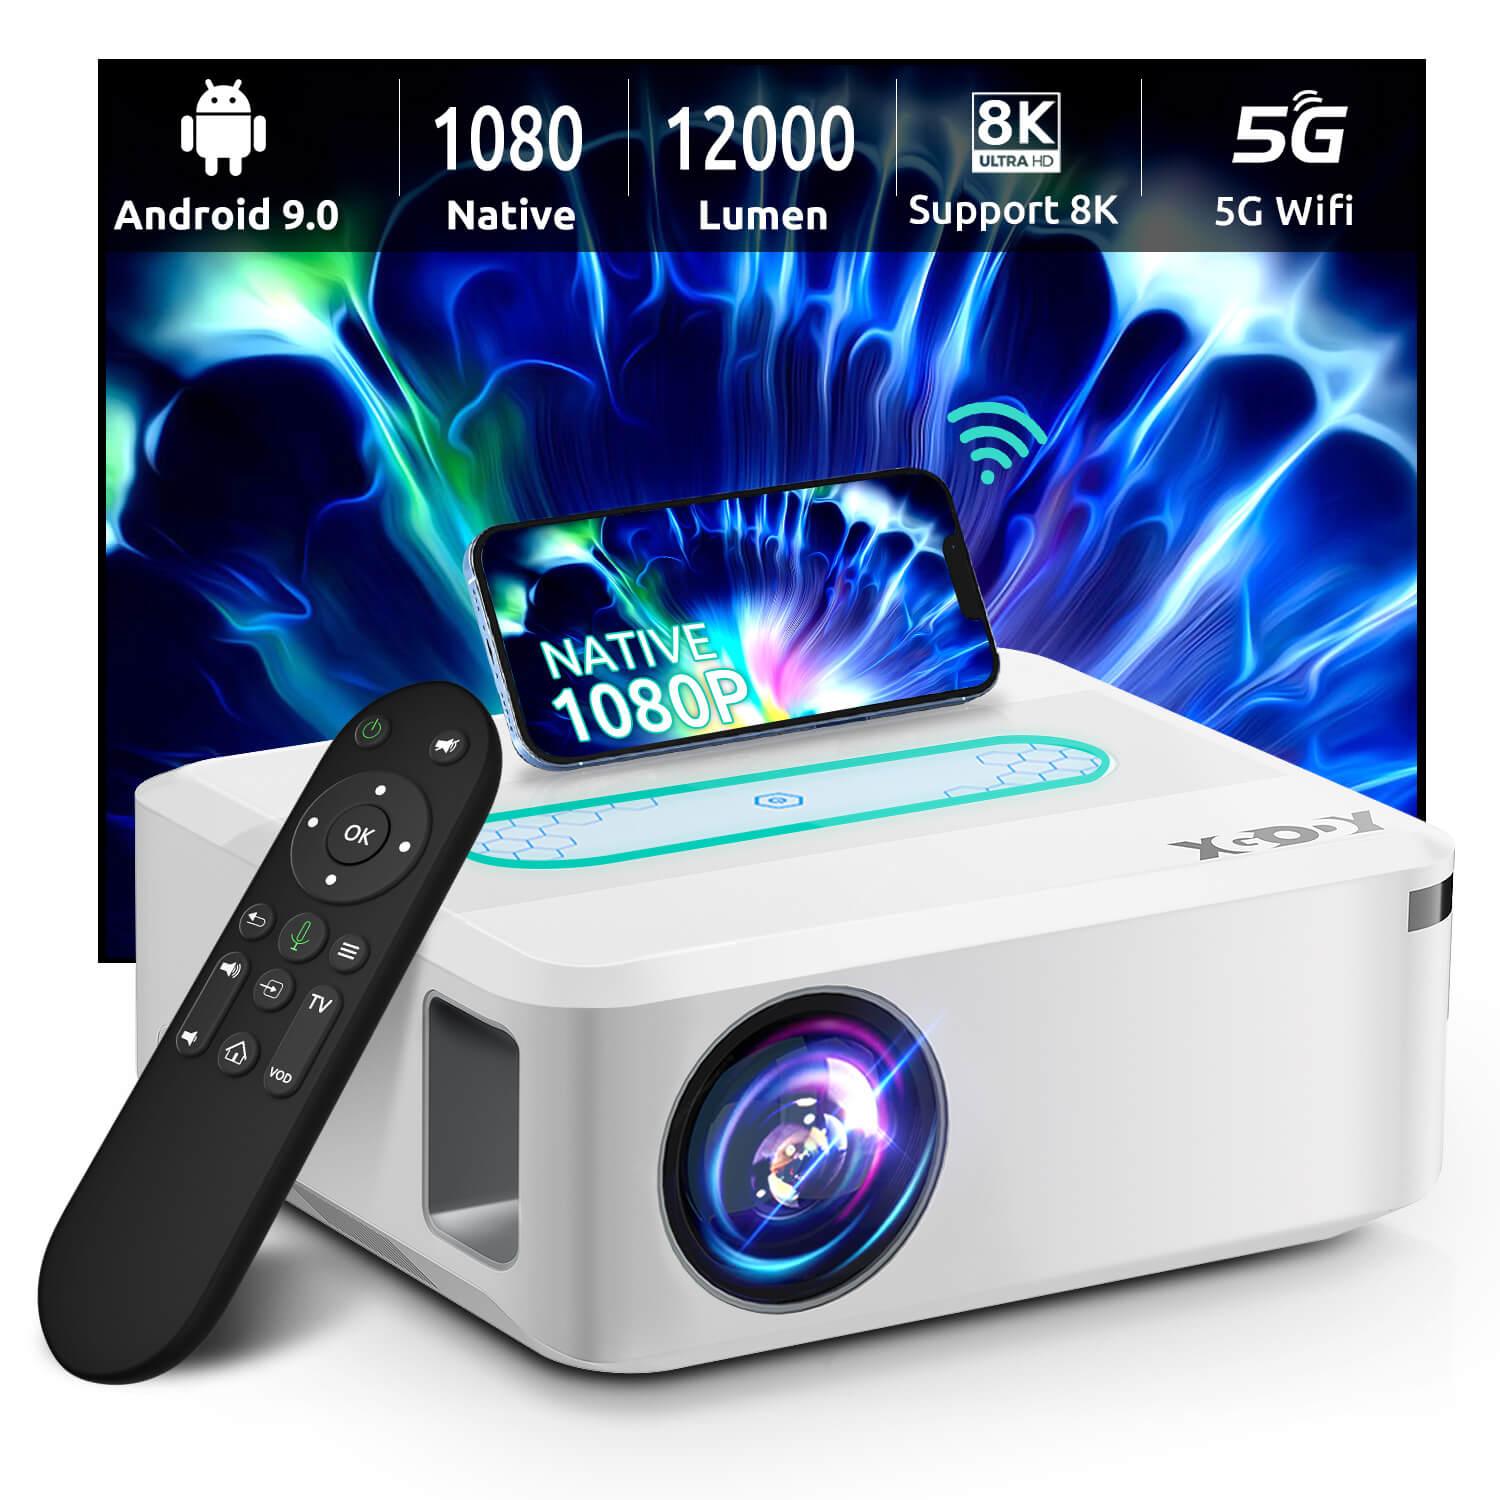 True 1080P 4K Android Projector WiFi 5G 2.4G, 8000Lumens FHD 1080P  Bluetooth Projectors With Apps 10000:1 High Contrast Home Theater Smart TV  Projecto PC映像、オーディオ関連機器